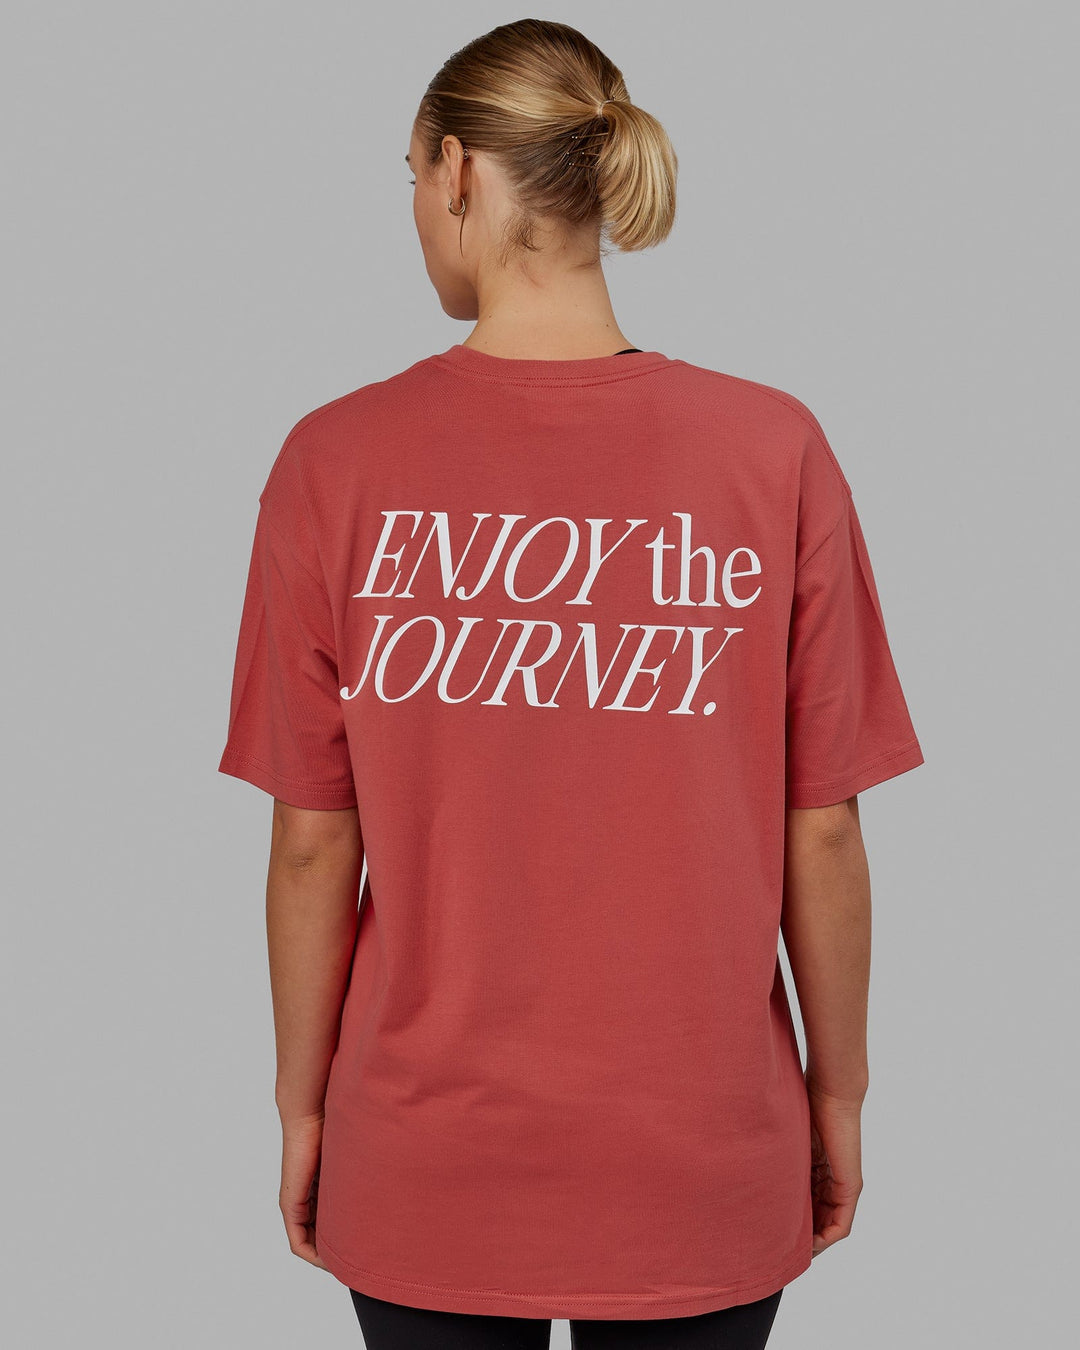 Woman wearing VS1 FLXCotton Tee Oversize - Mineral Red-White